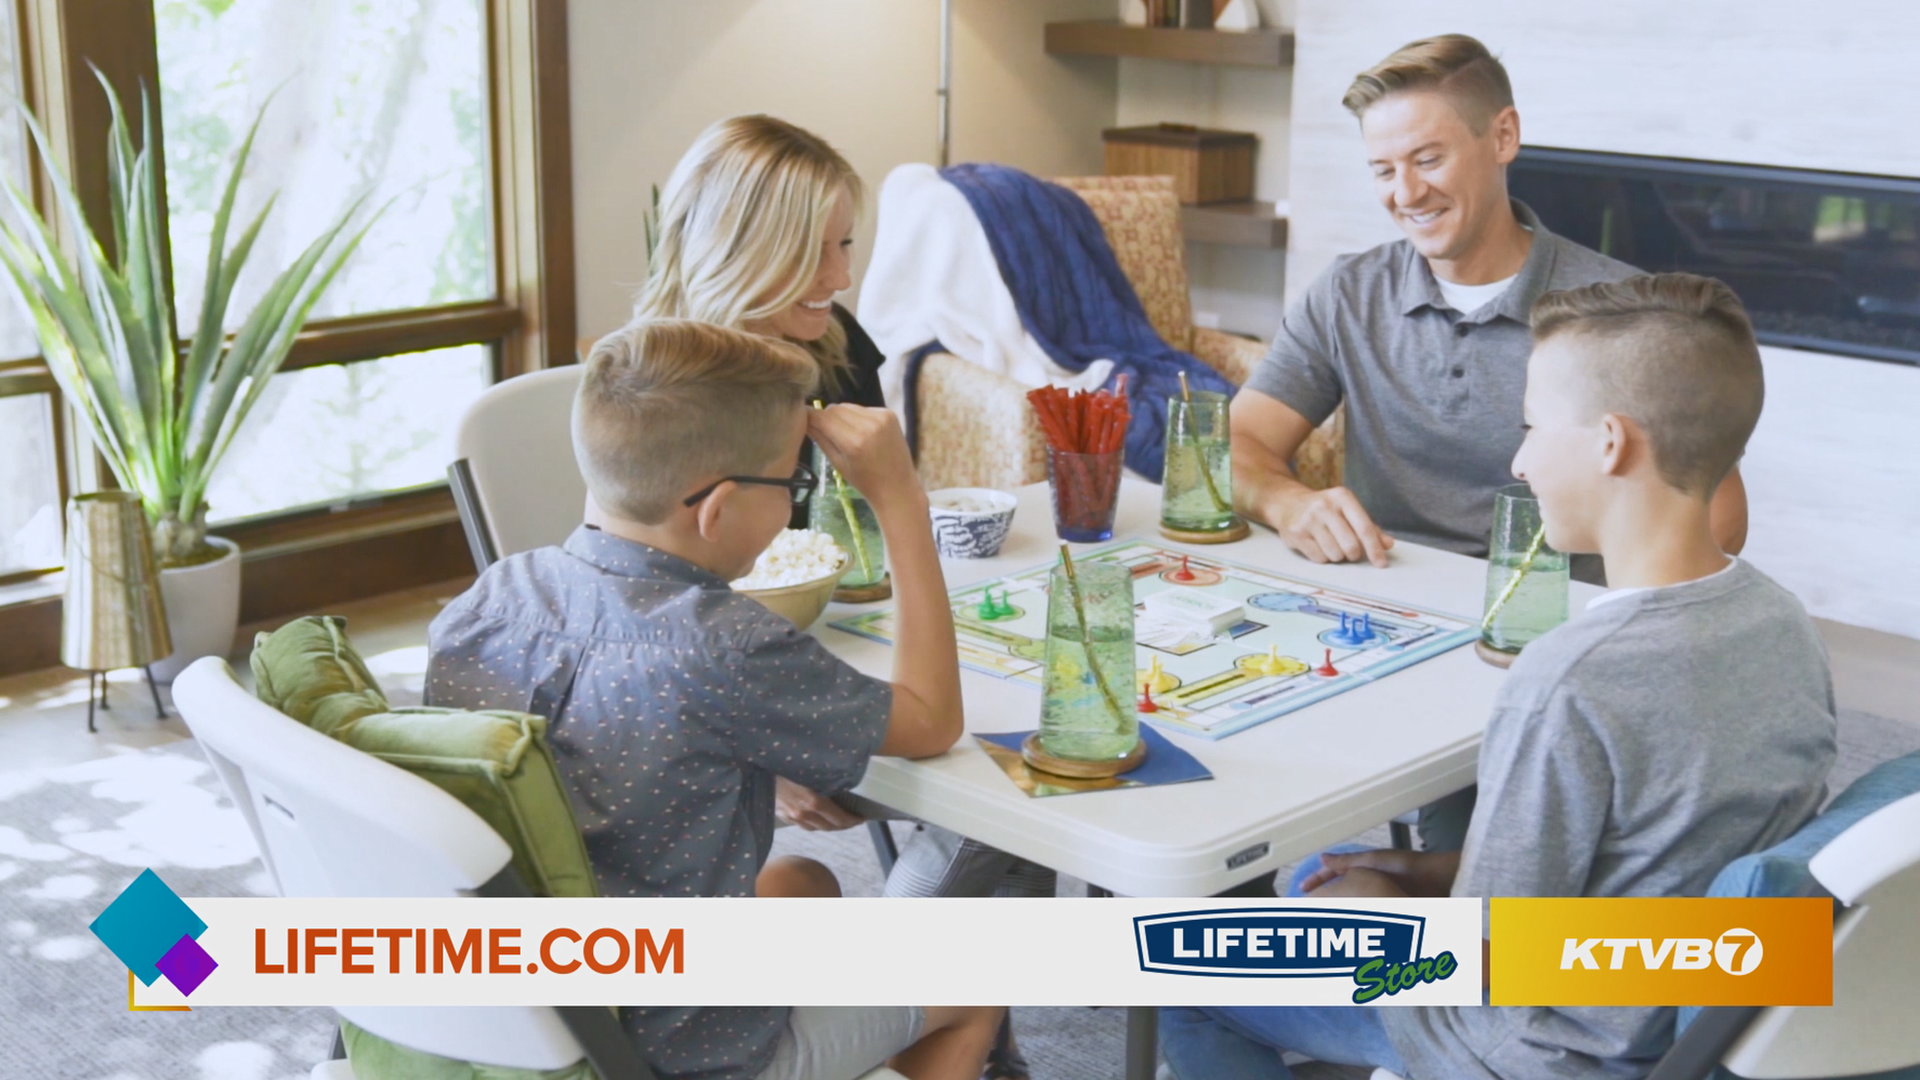 Lifetime Products is a world-wide trusted brand offering picnic tables, folding tables, chairs, coolers and more. Located in Boise!